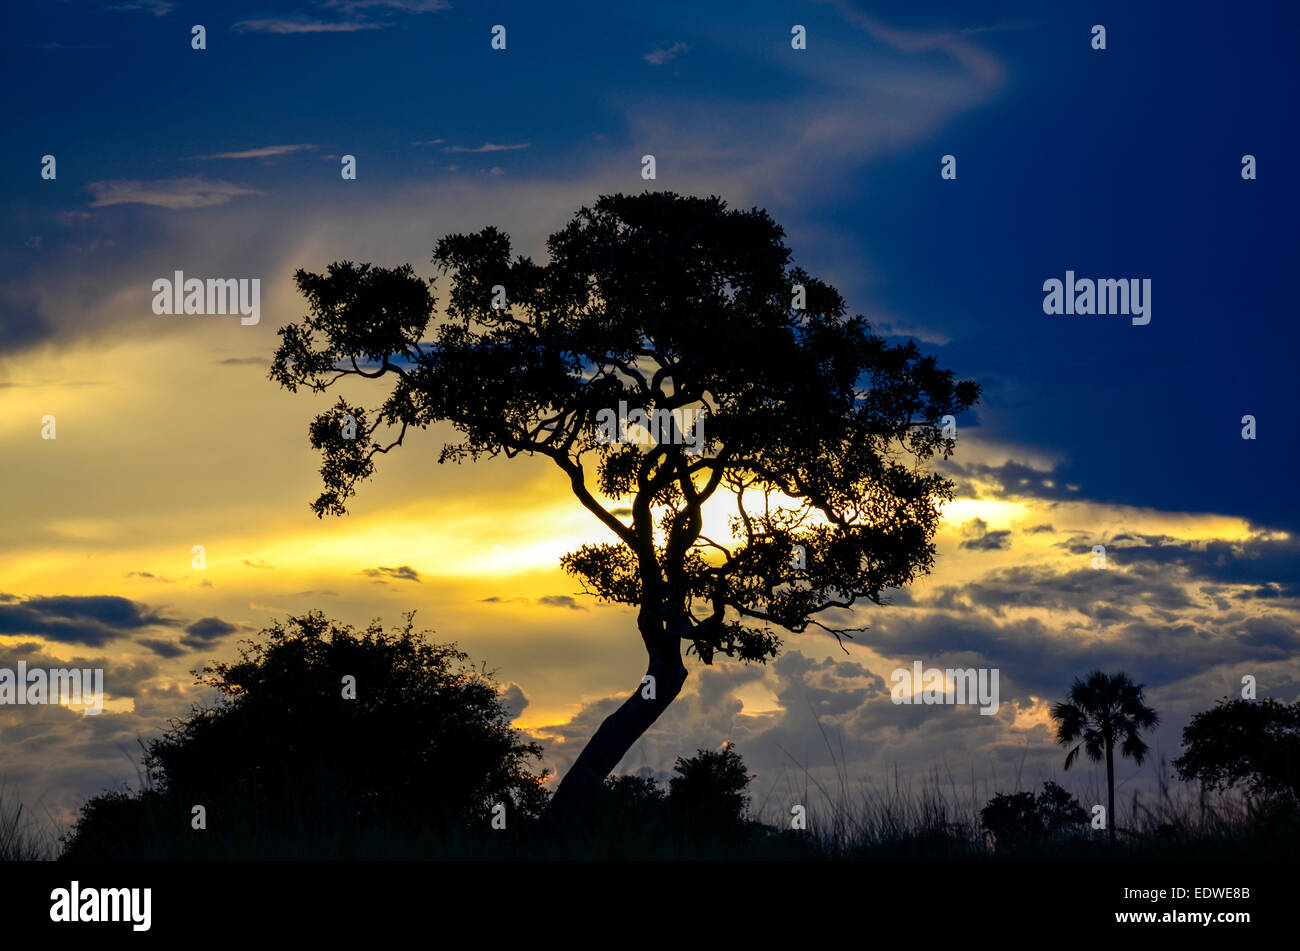 The silouette of a tree at sunset in the okavango delta in Botswana Stock Photo